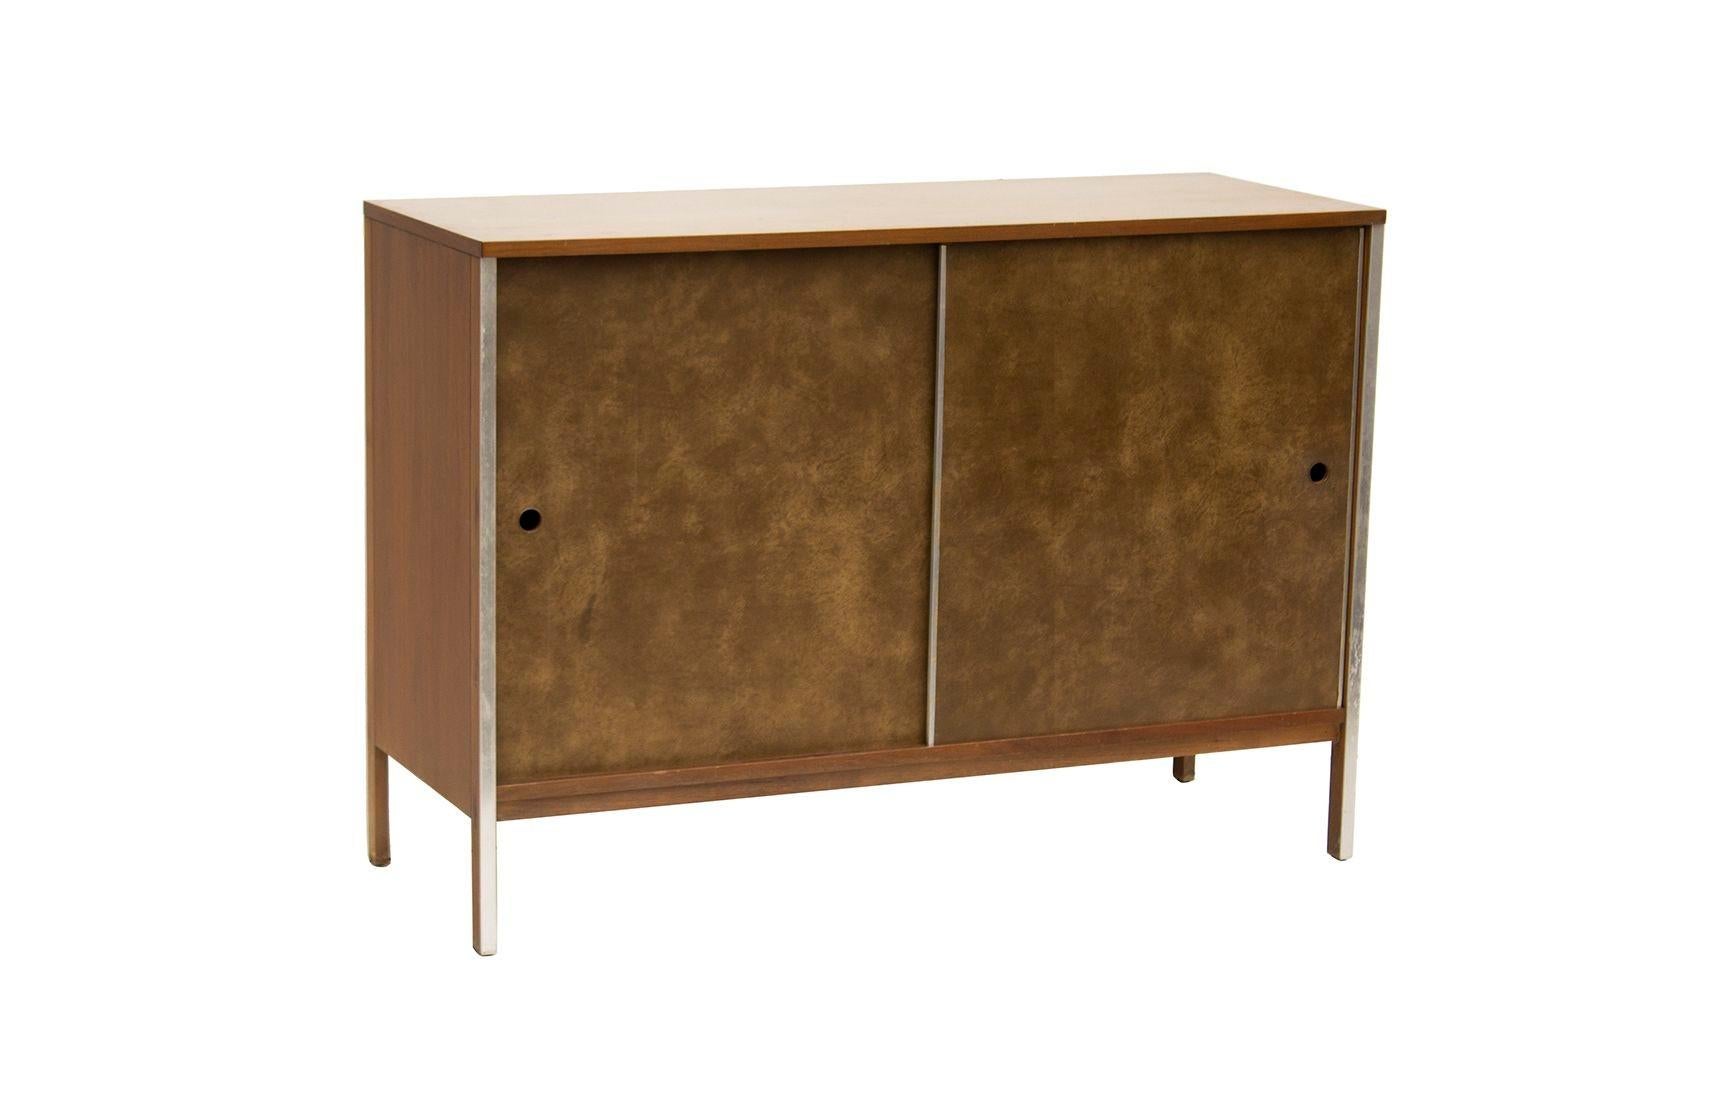 USA, 1960s
Mid-century buffet or sideboard designed by Paul McCobb for Calvin Furniture. Walnut, aluminum, and leatherette. The clean modern lines from the Linear Group line make this vintage credenza a handsome storage cabinet well suited to any